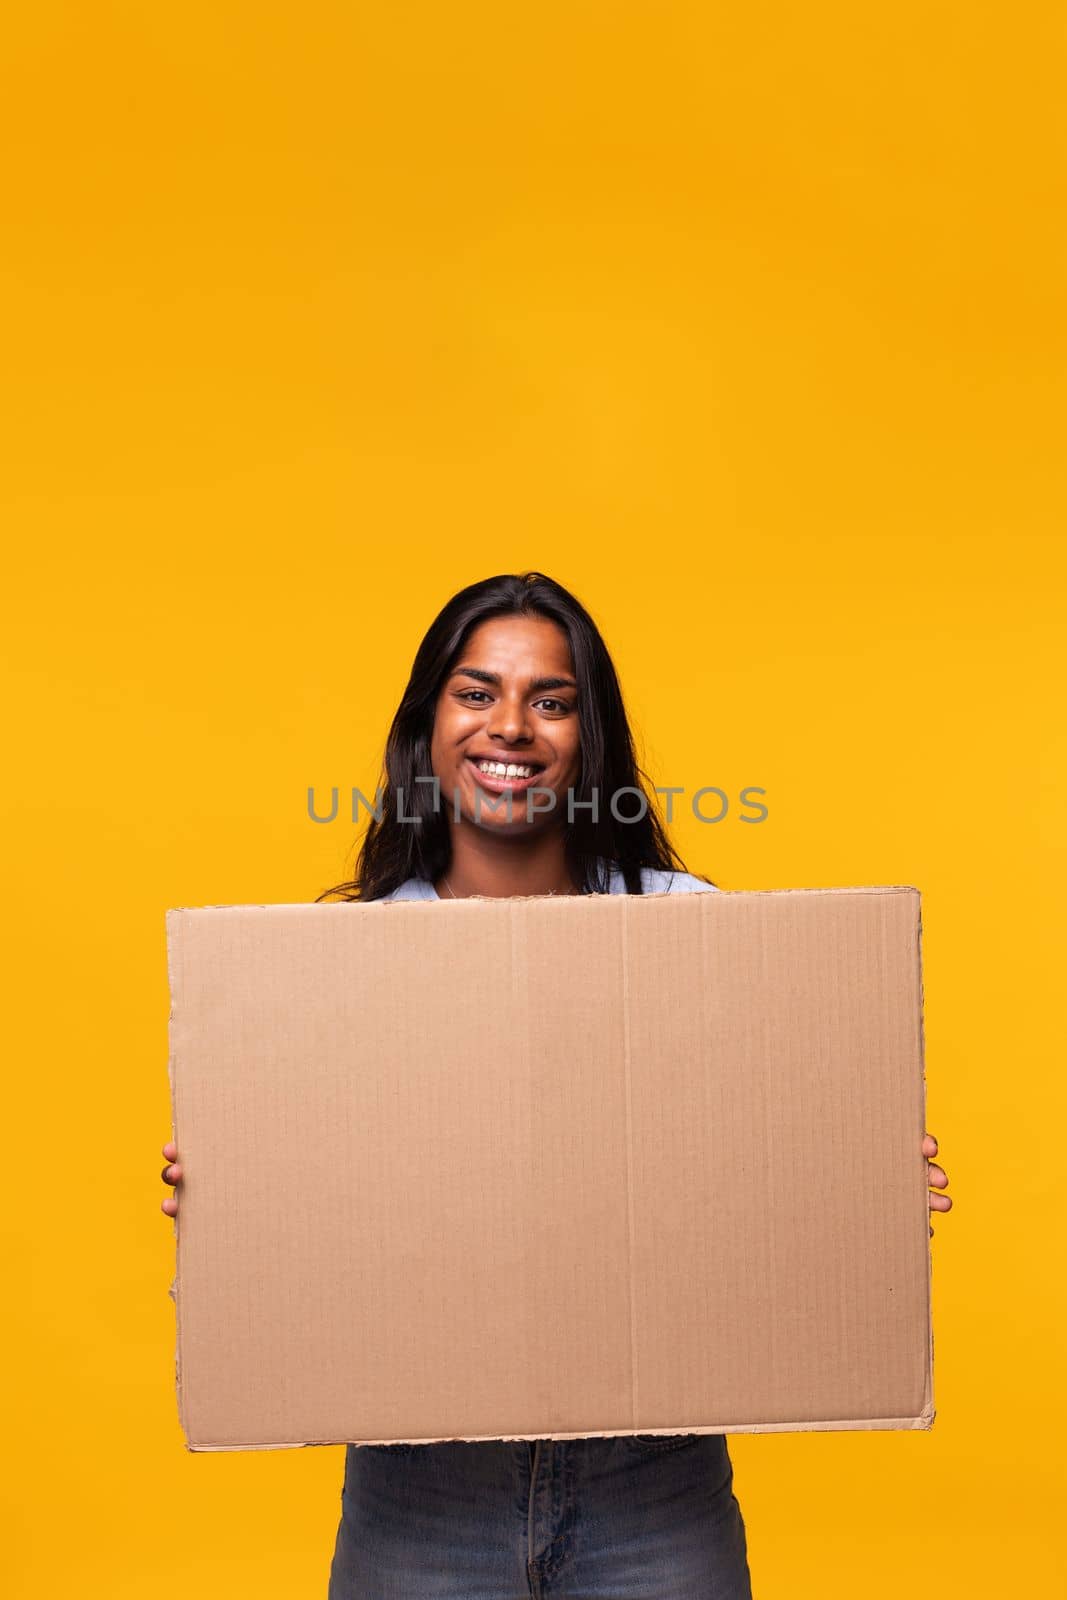 Young Indian asian woman looking at camera holding a cardboard banner isolated in yellow background. Studio shot. Vertical image.